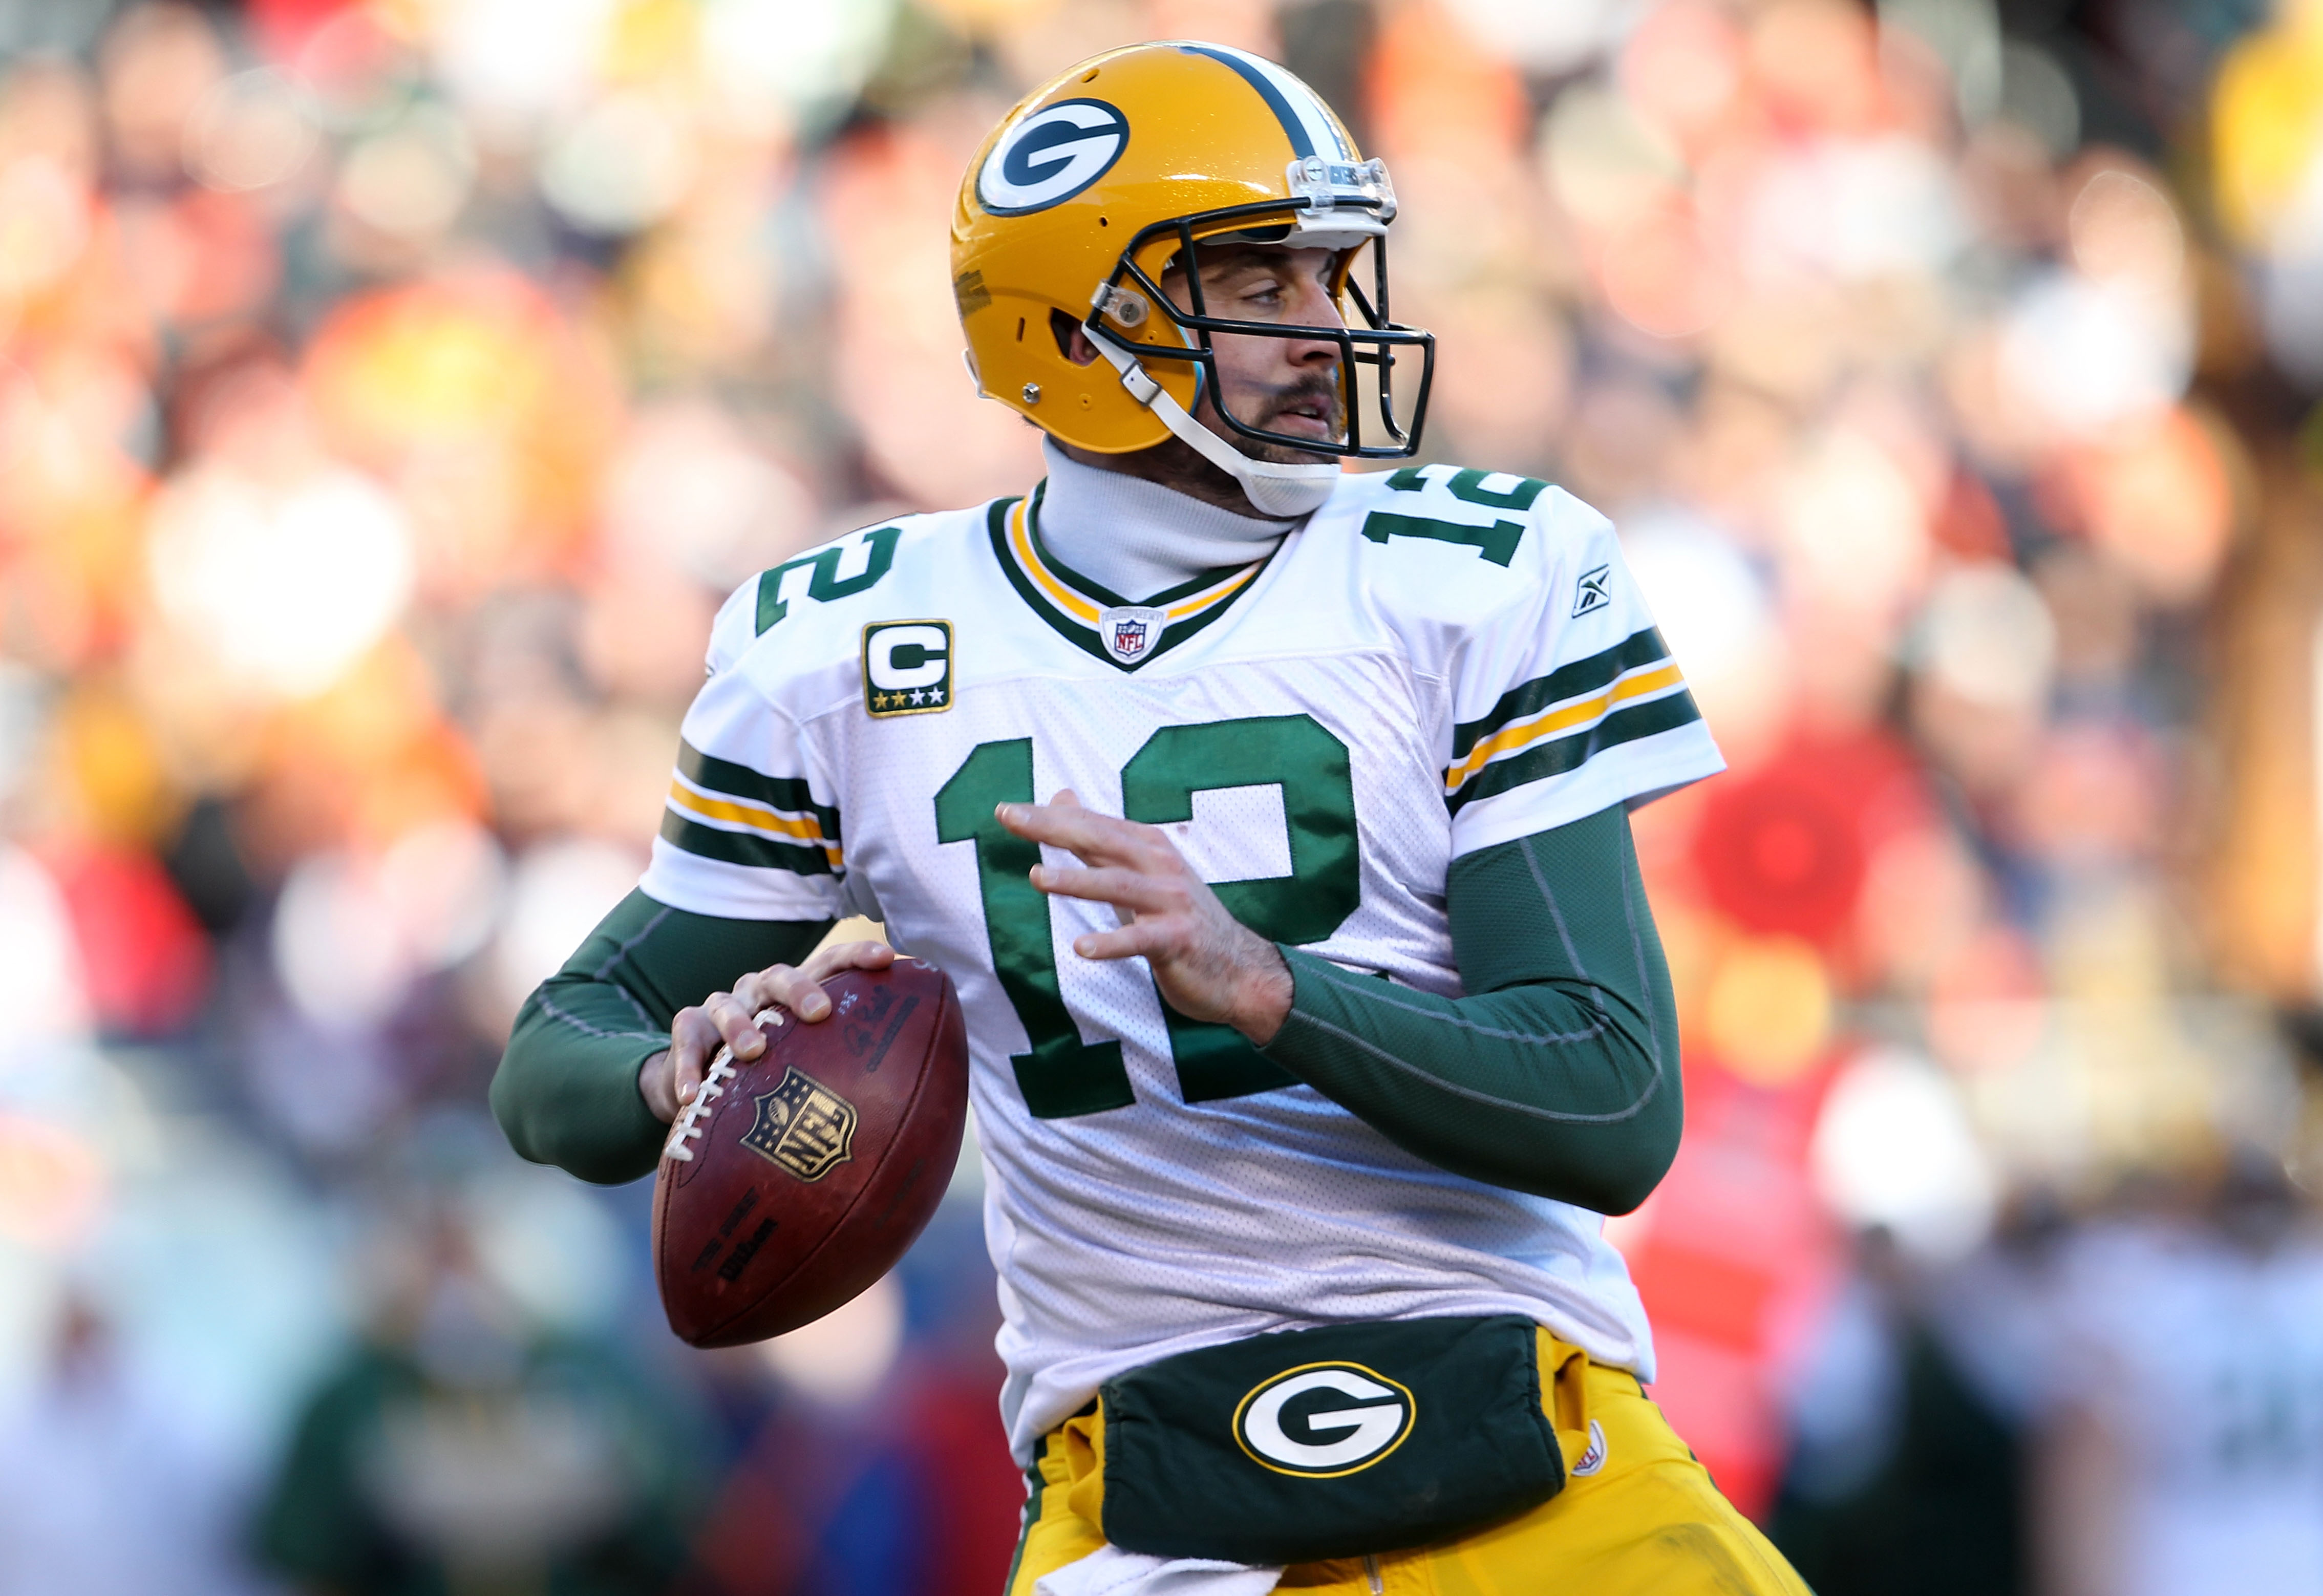 CHICAGO, IL - JANUARY 23:  Quarterback Aaron Rodgers #12 of the Green Bay Packers throws a pass in the second half against the Chicago Bears in the NFC Championship Game at Soldier Field on January 23, 2011 in Chicago, Illinois.  (Photo by Jamie Squire/Ge